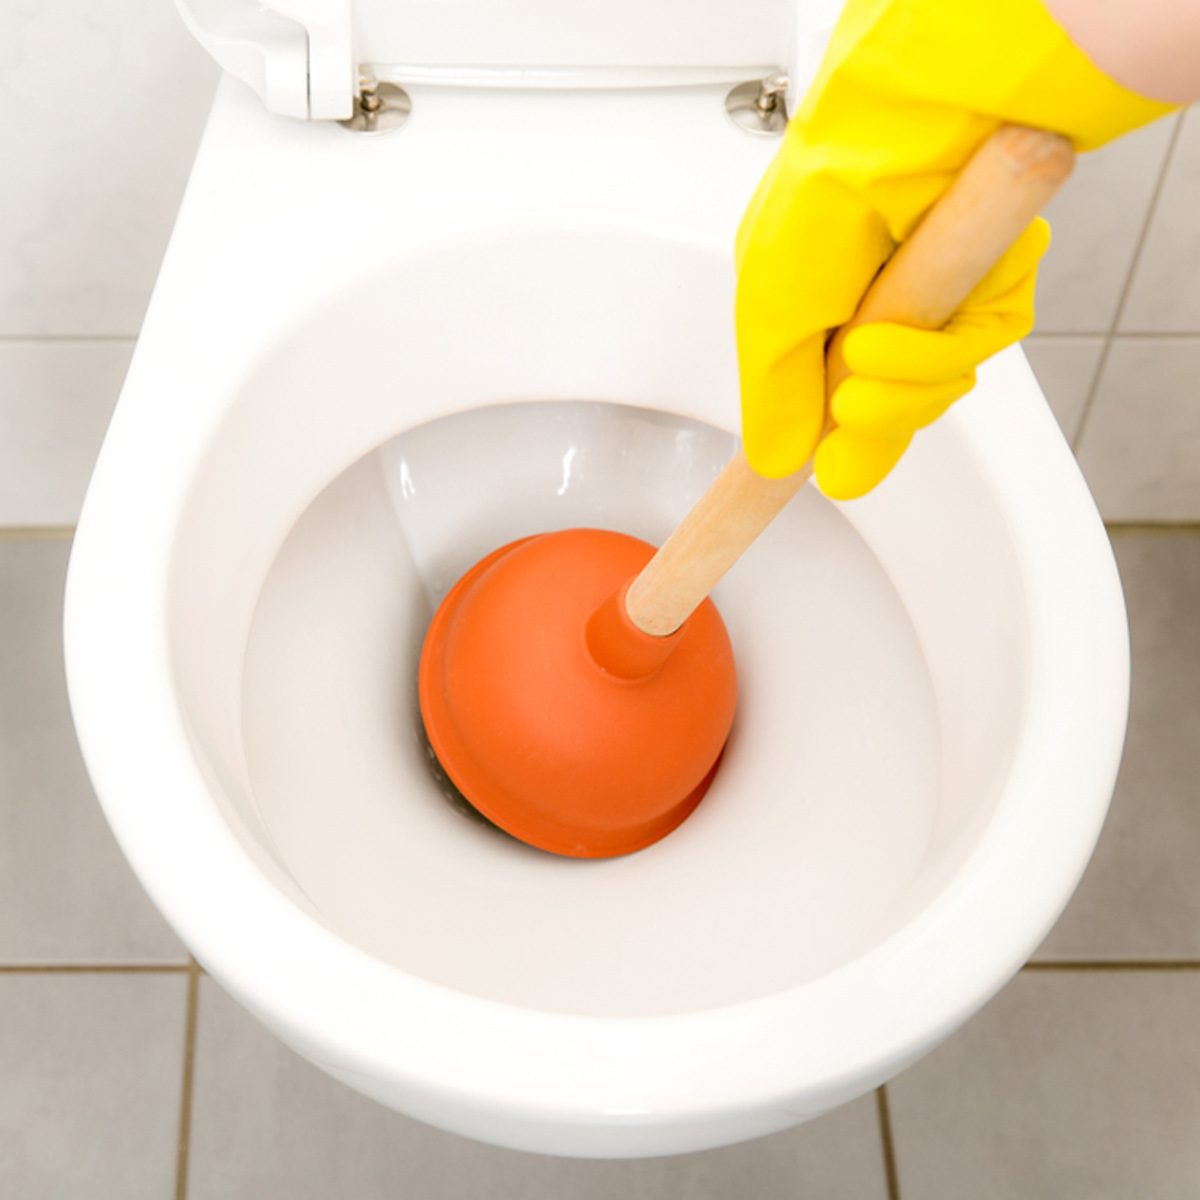 Have You Been Using a Plunger the Right Way?